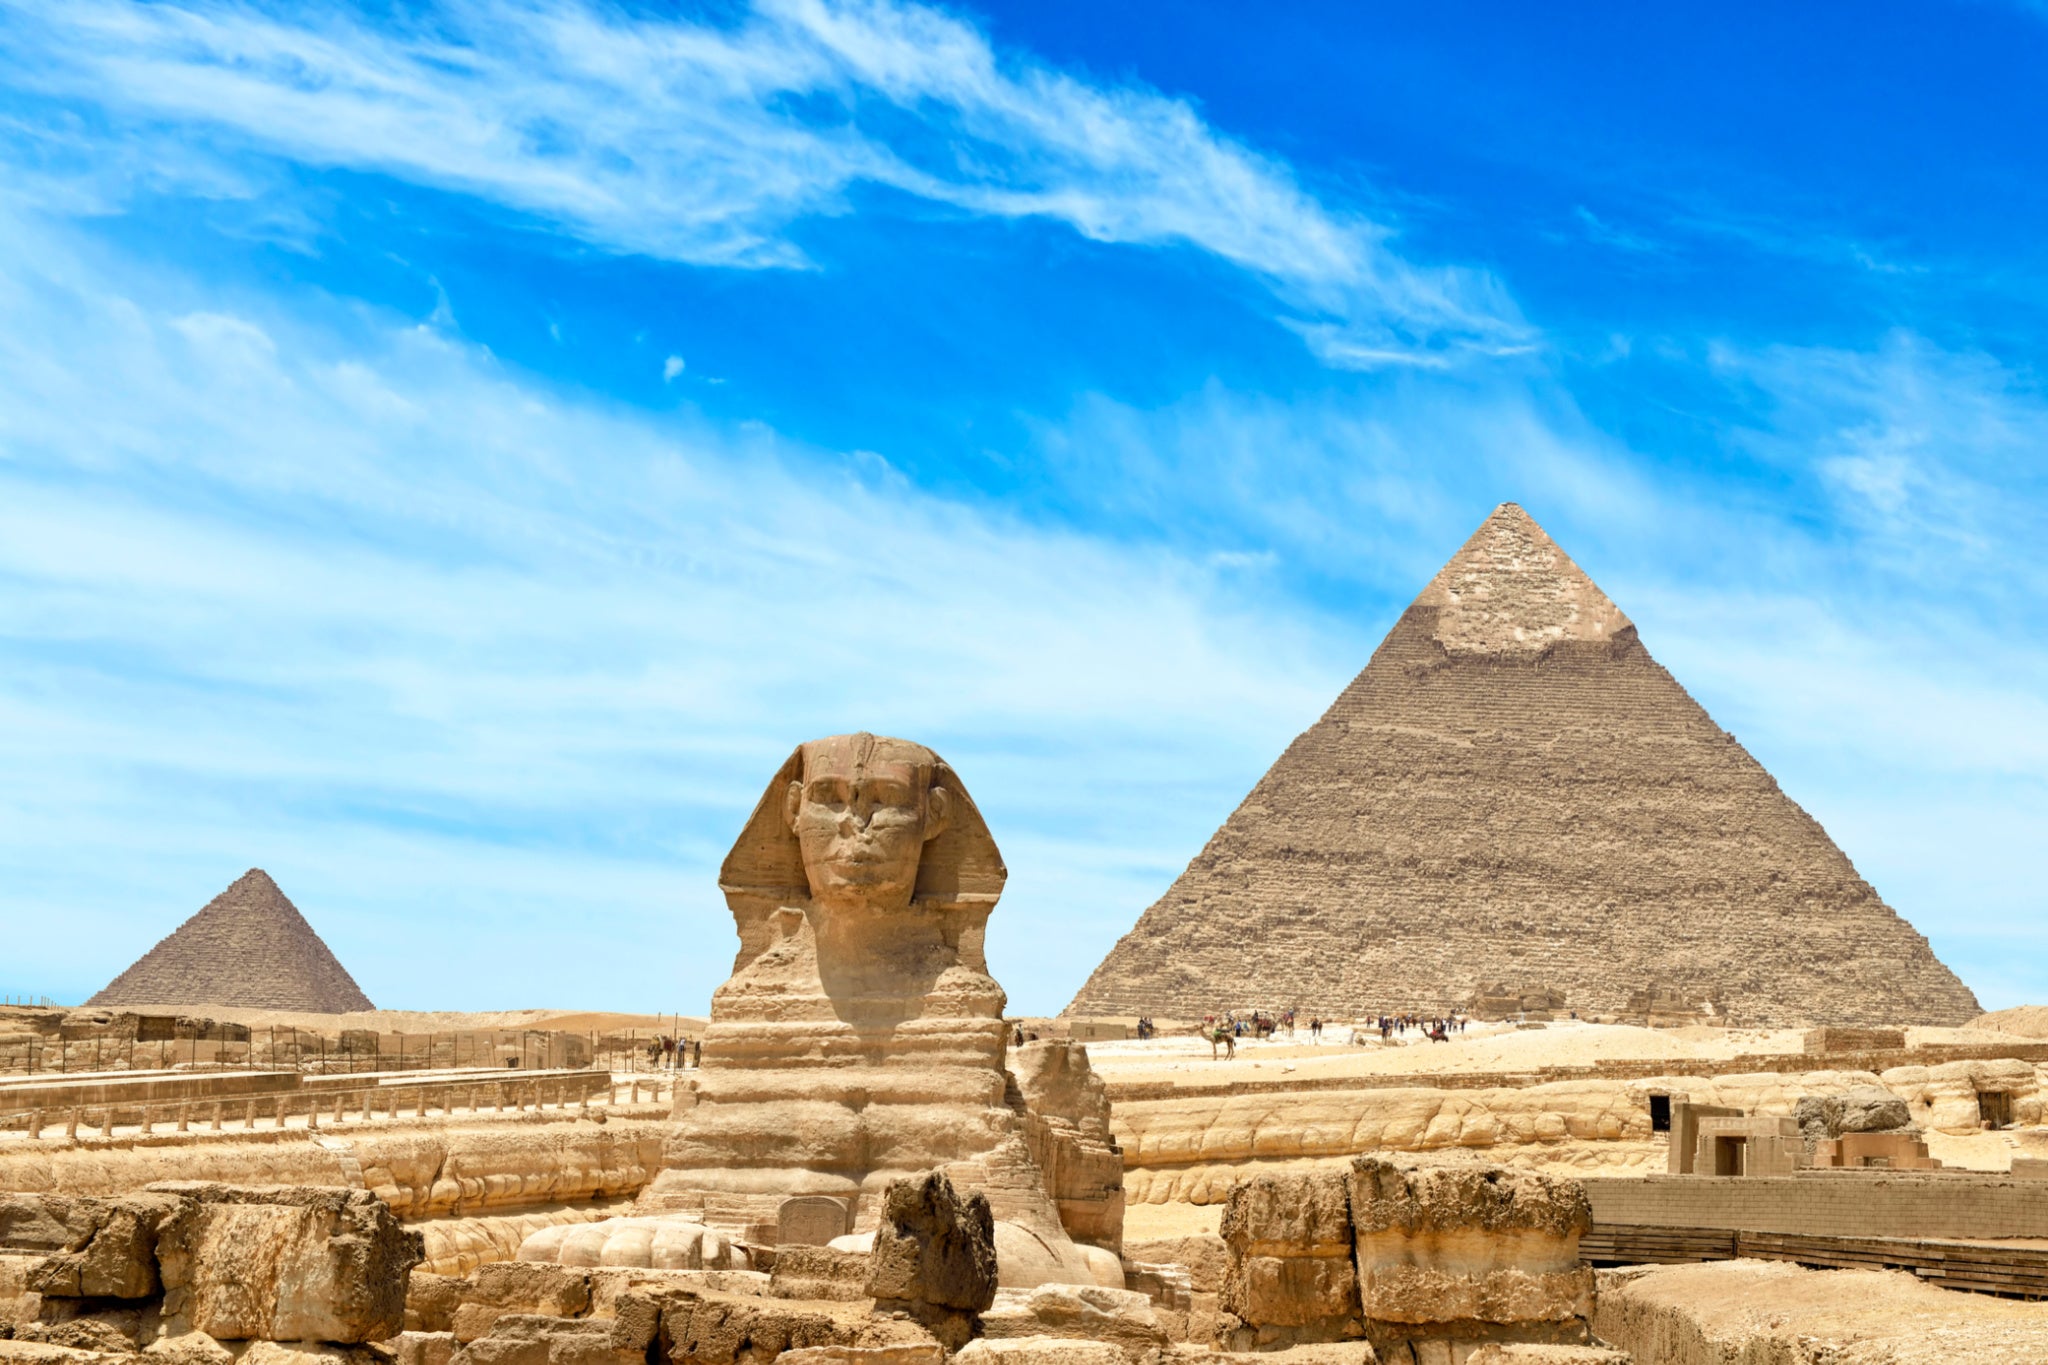 The Giza pyramid complex was built more than 4,000 years ago